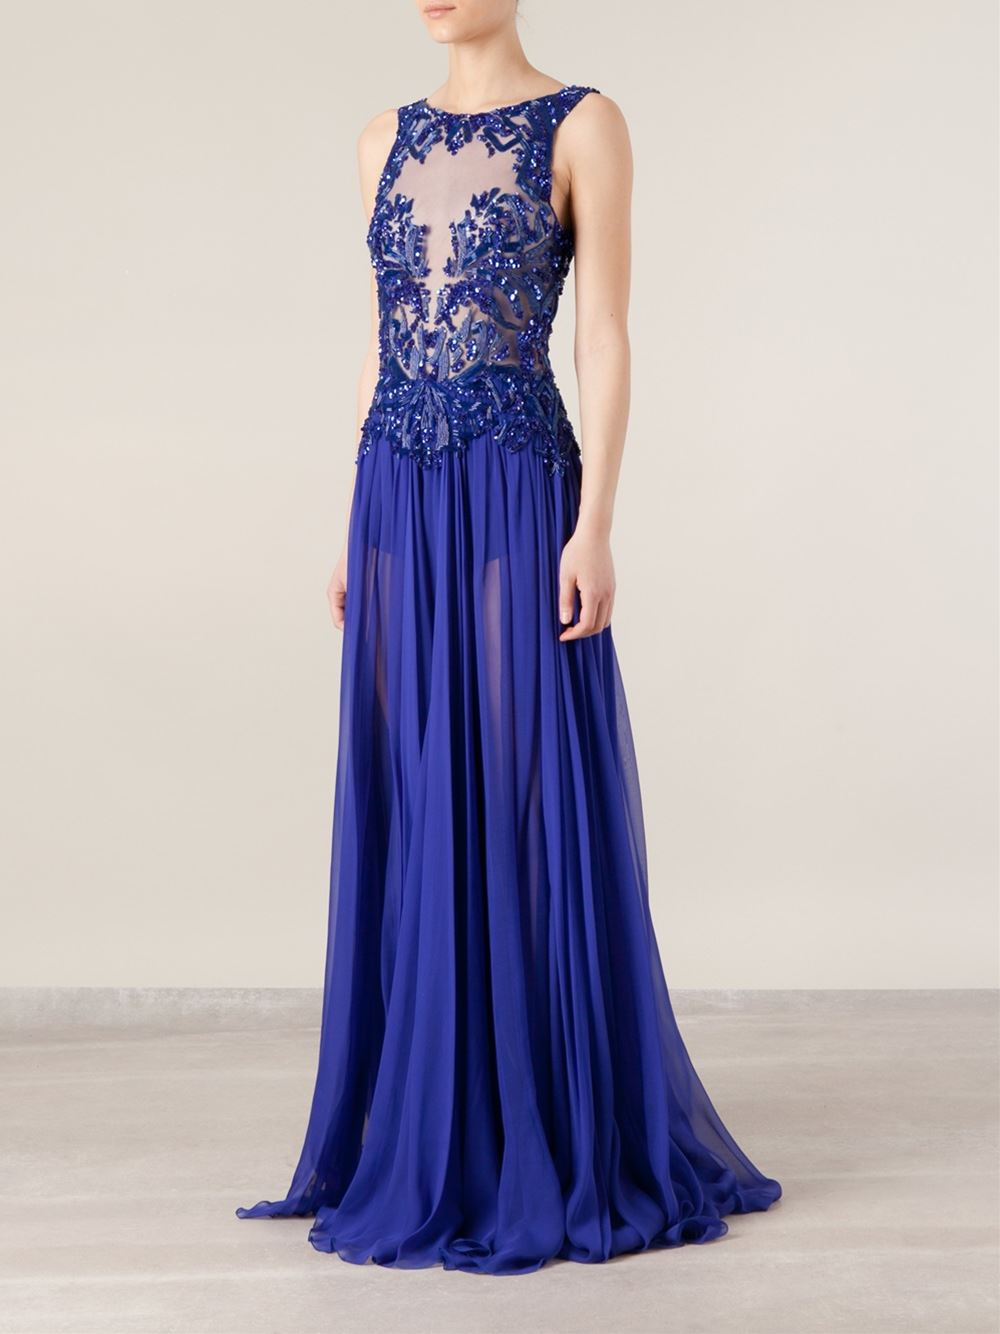 Zuhair Murad Sequin Embellished Pleated Gown in Blue - Lyst